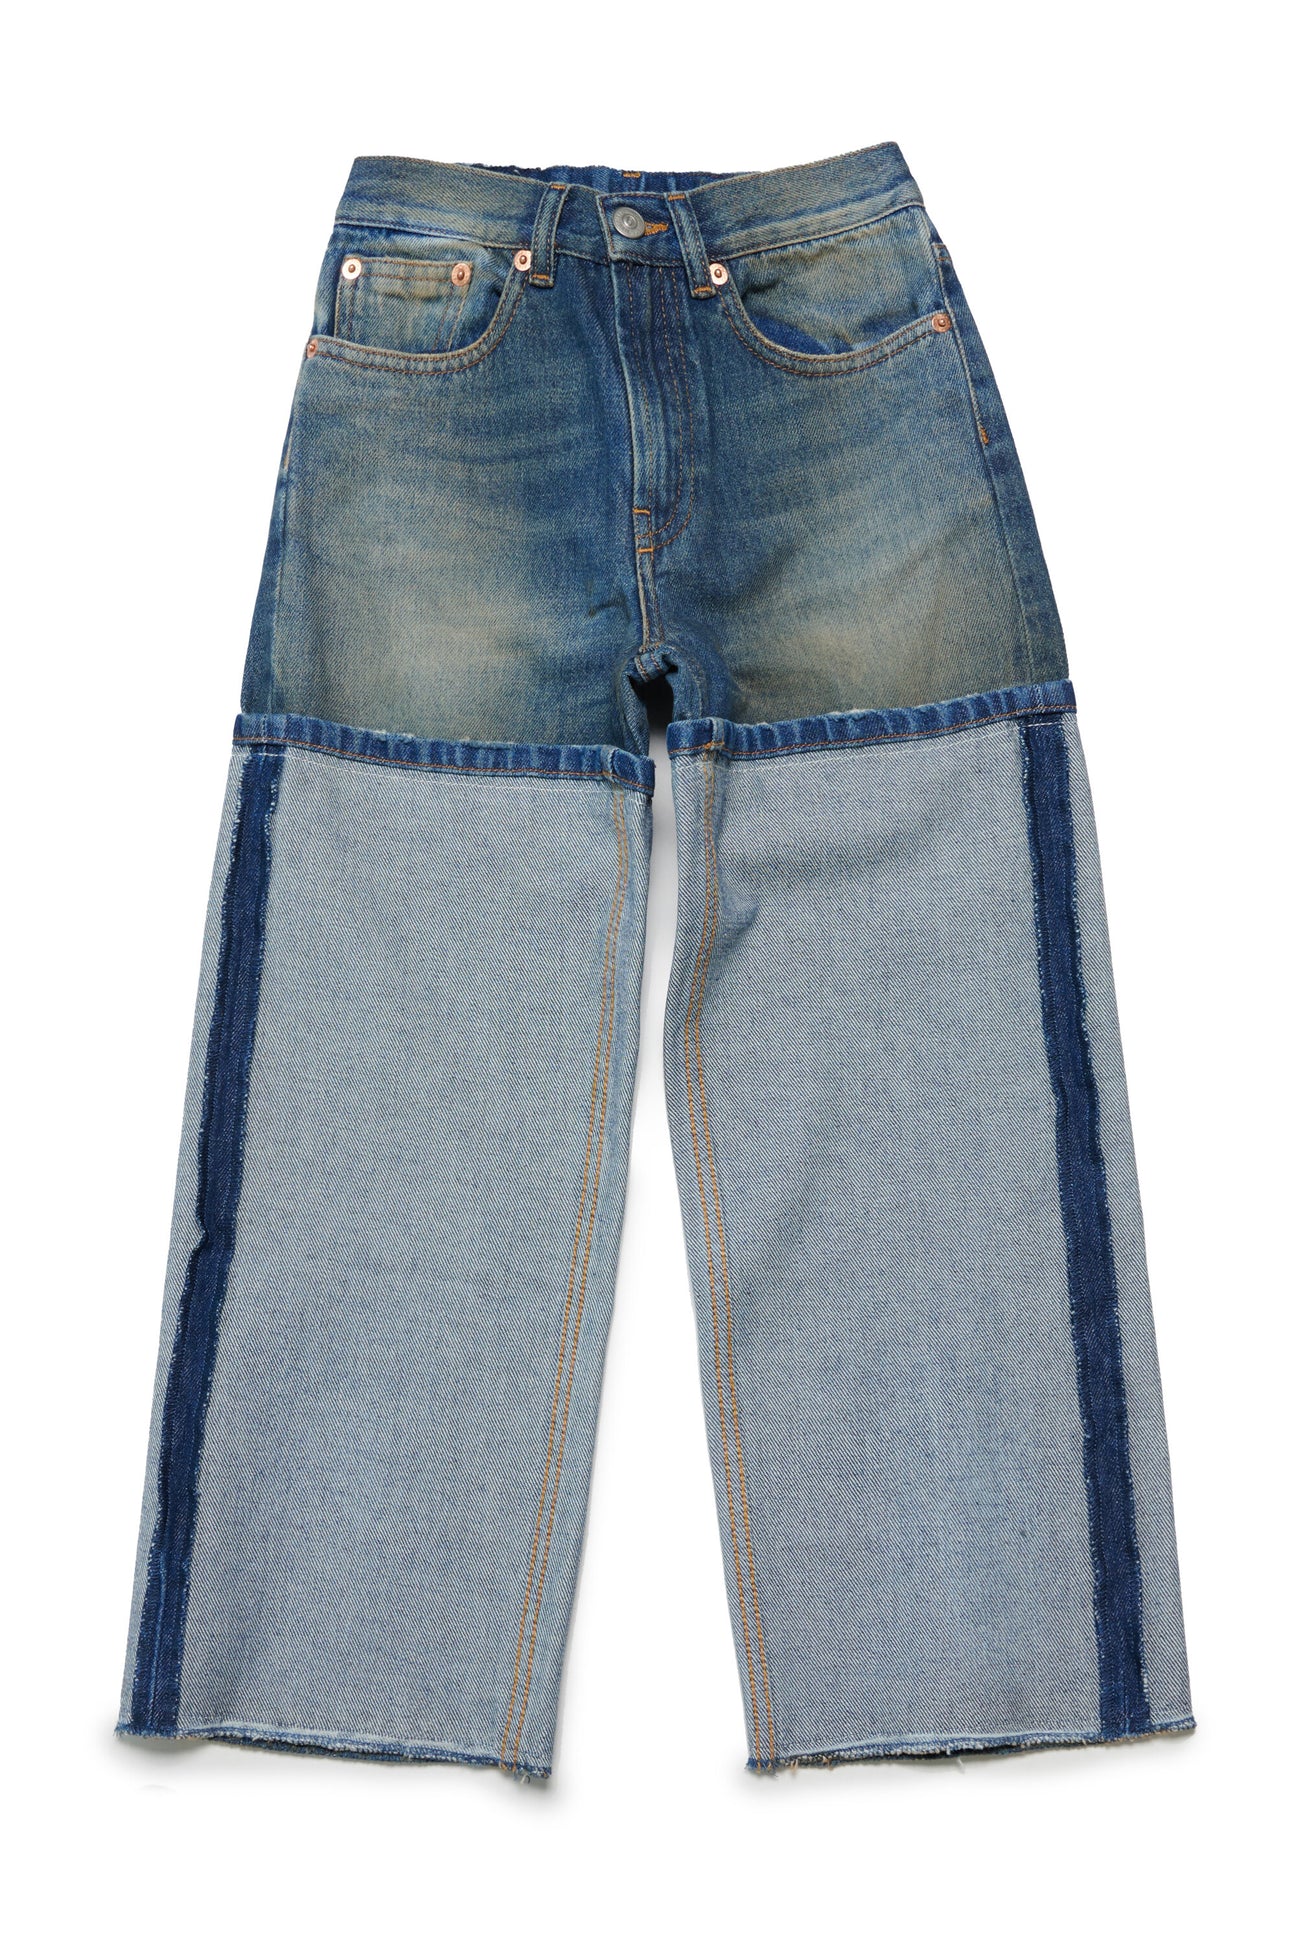 Re-cut shaded jeans Re-cut shaded jeans